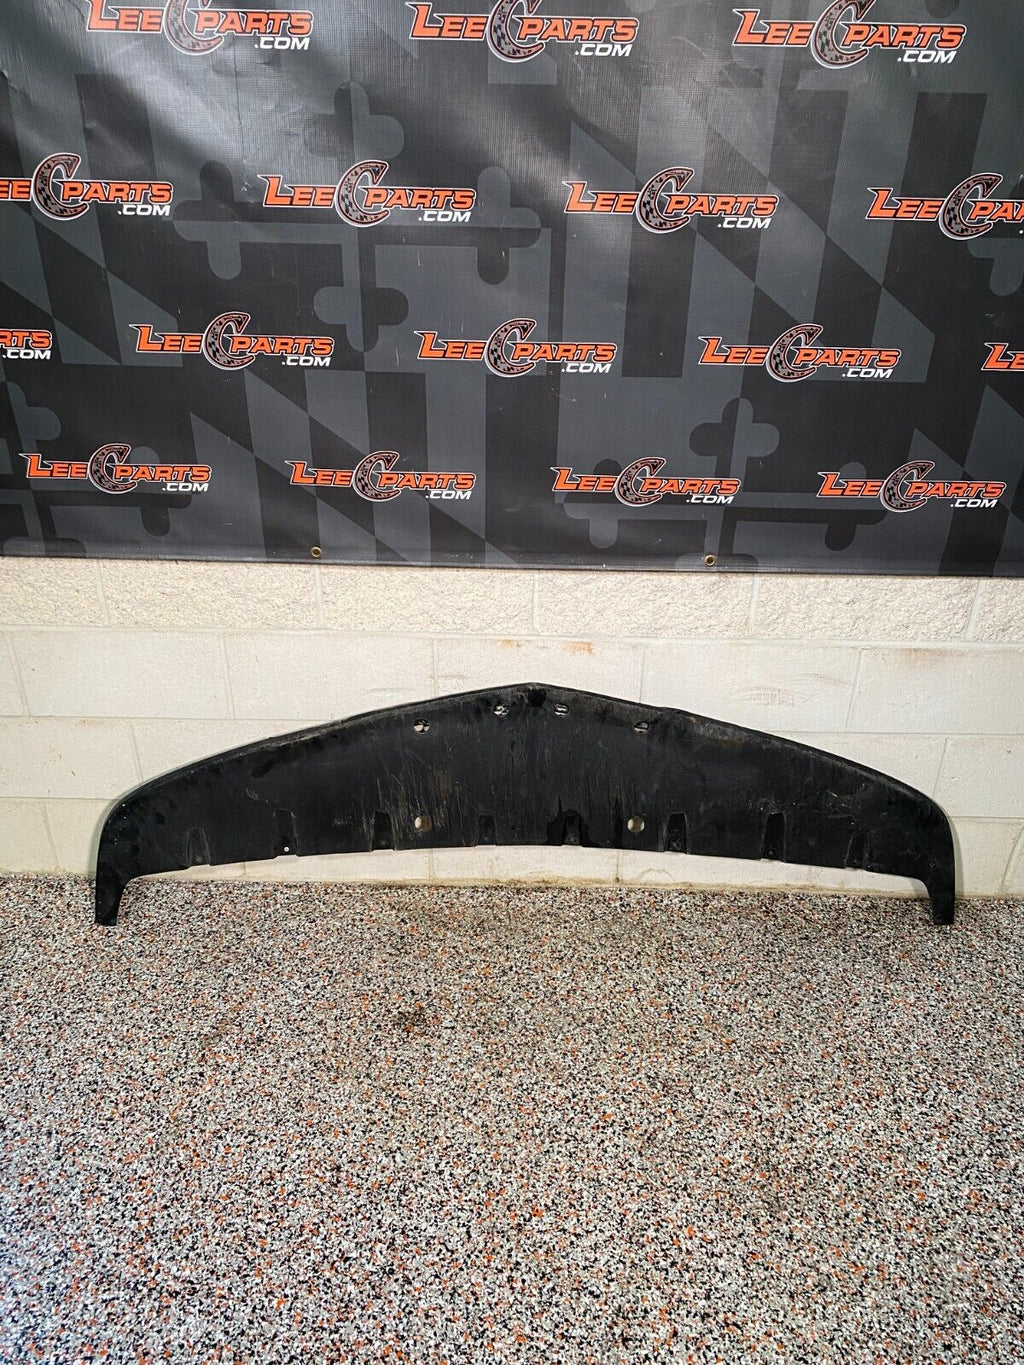 2013 CHEVROLET CAMARO SS 1LE OEM LOWER FRONT LIP USED **SCUFFS**